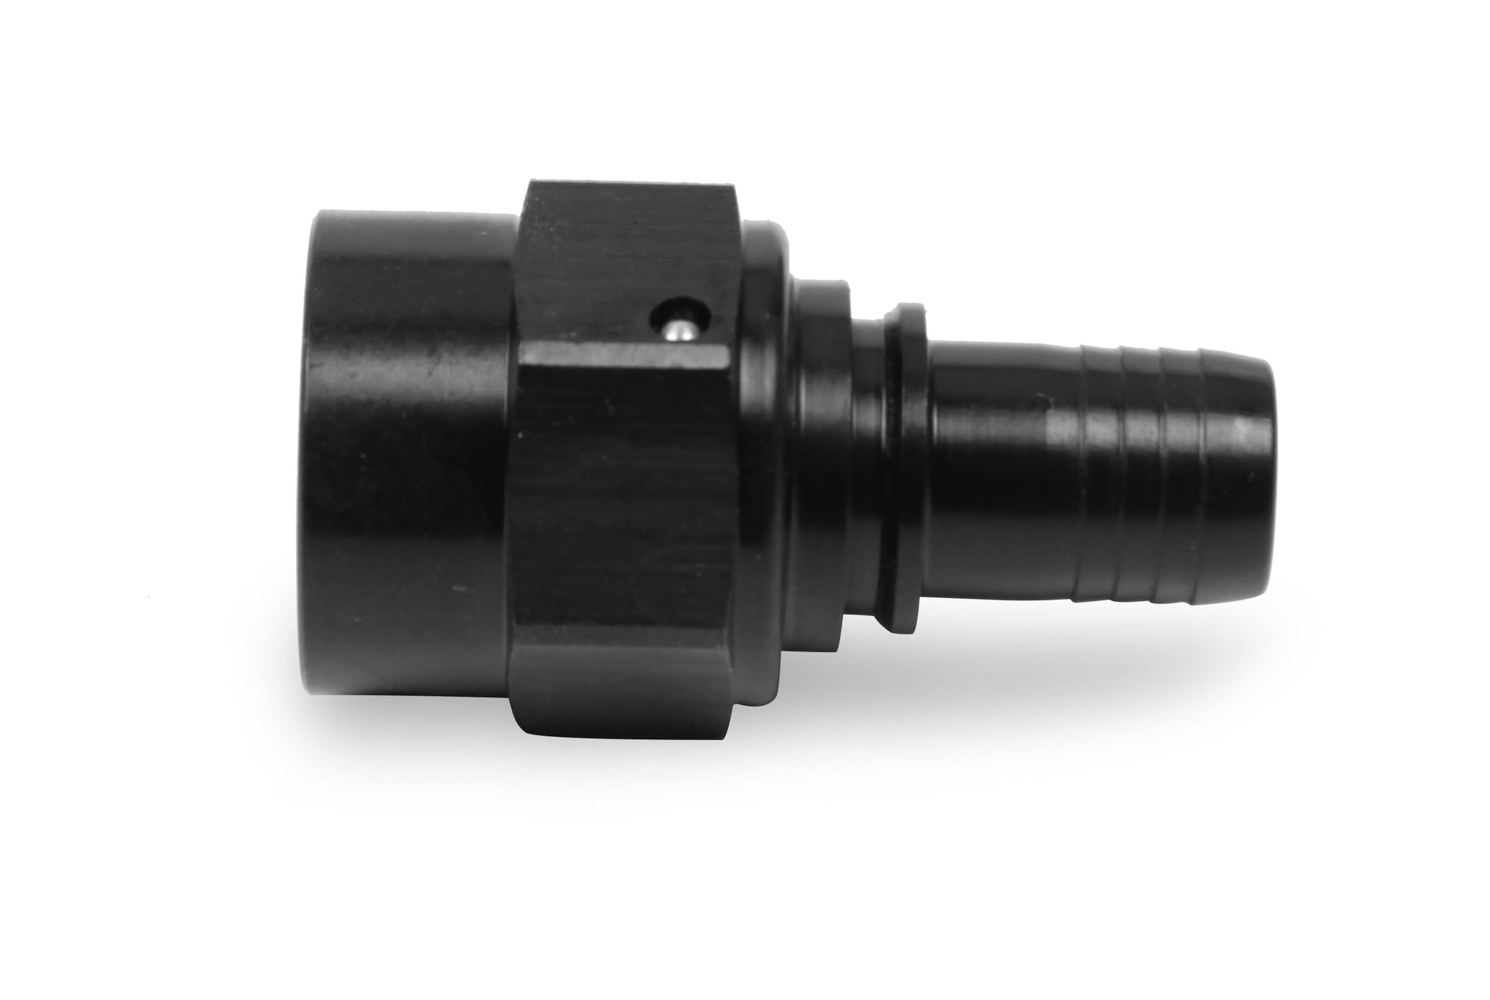 Earls 680106ERL - Fitting, Hose End, Ultra-Pro, Straight, 6 AN Hose Barb to 6 AN Female, Aluminum, Black Anodized, Each